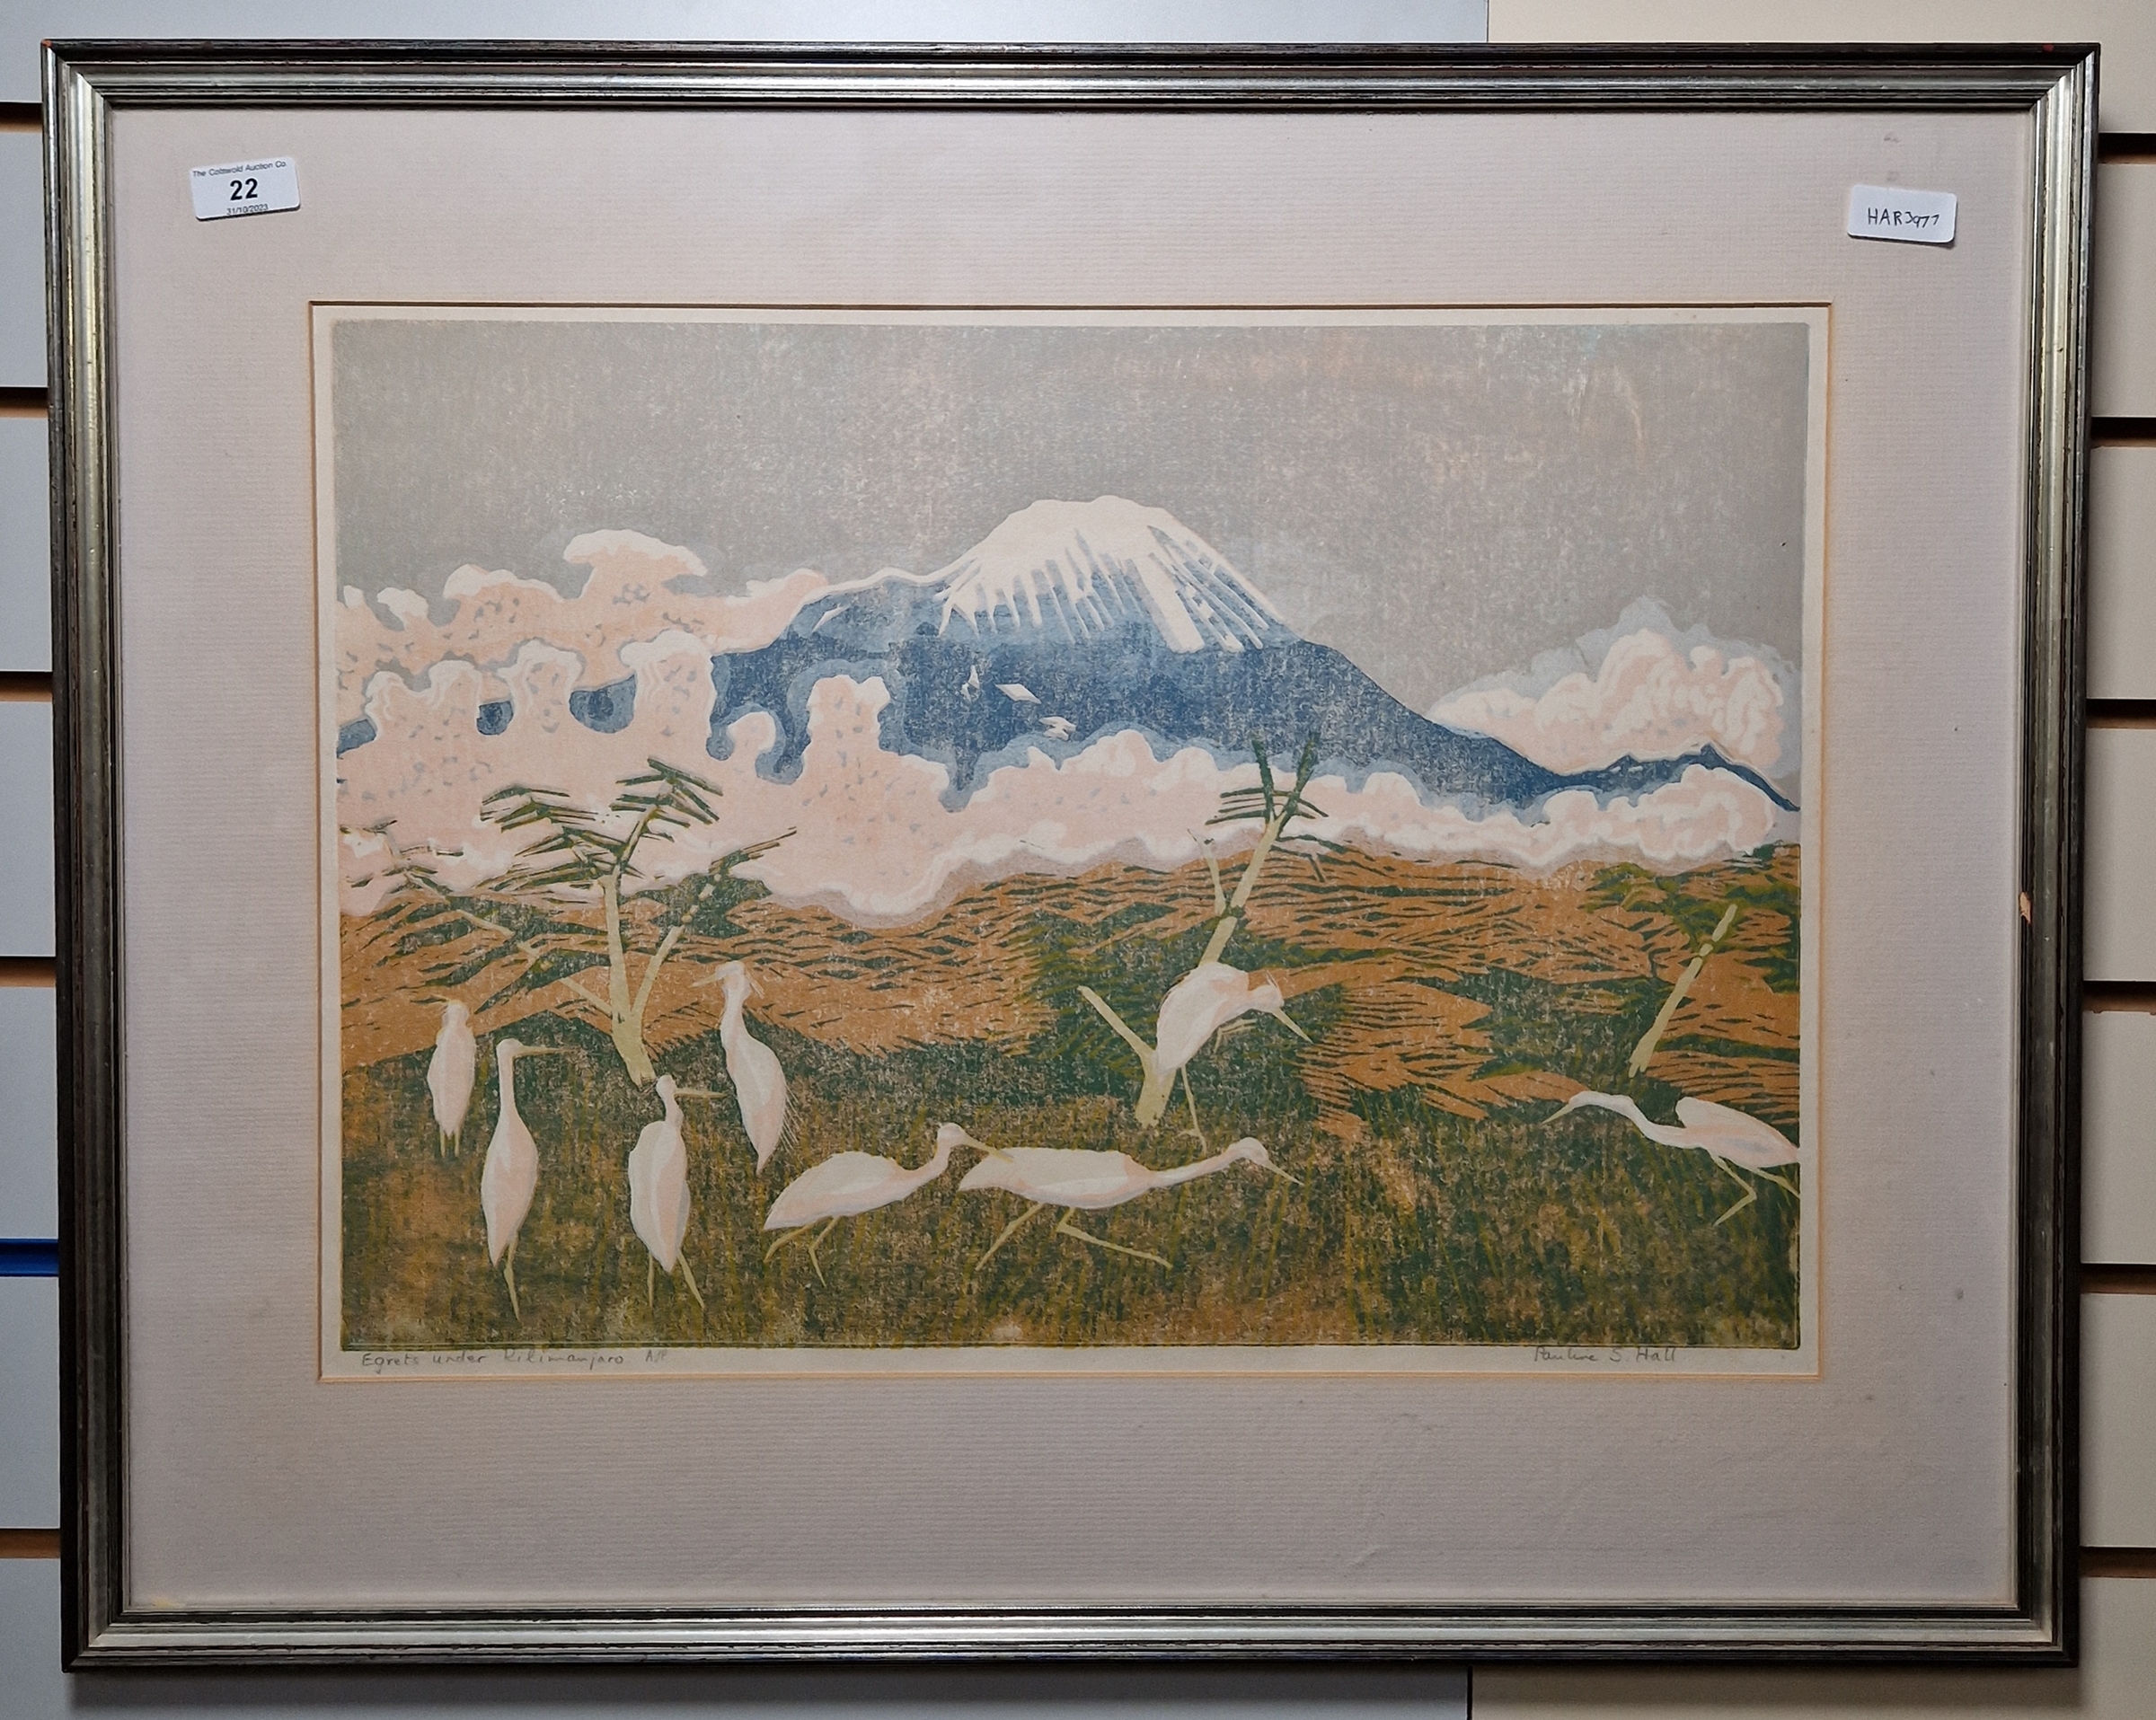 Pauline S Hall (20th/21st century) Colour lithograph 'Egrets Under Kilimanjaro', artist's proof, - Image 2 of 4